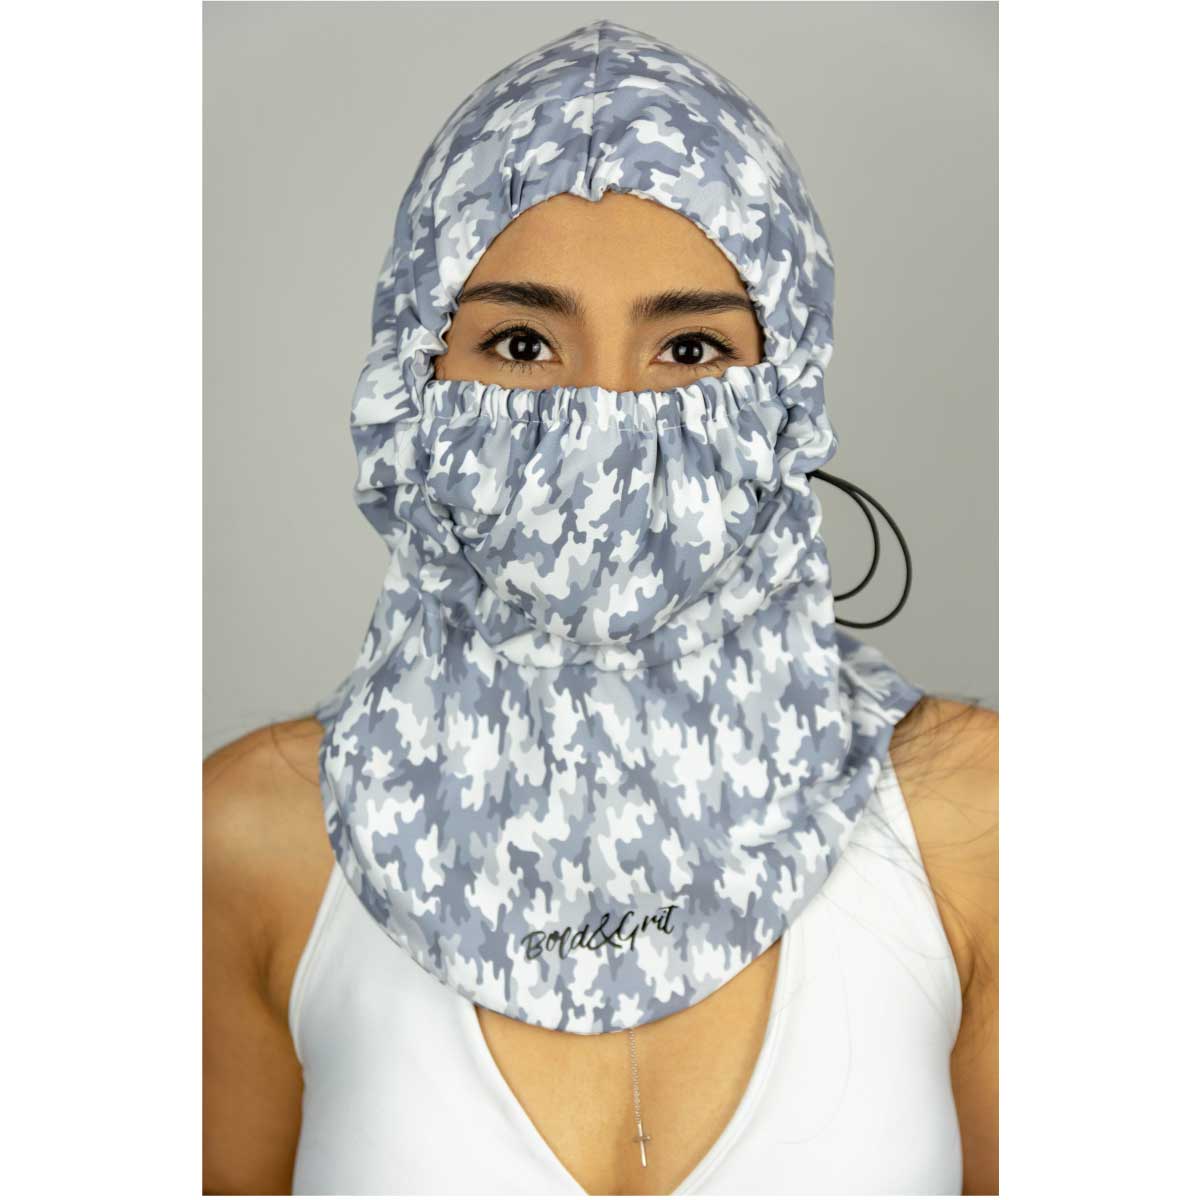 PROTECTIVE CAMOUFLAGED GRAY HOODIE - FACE MASK INCLUDED